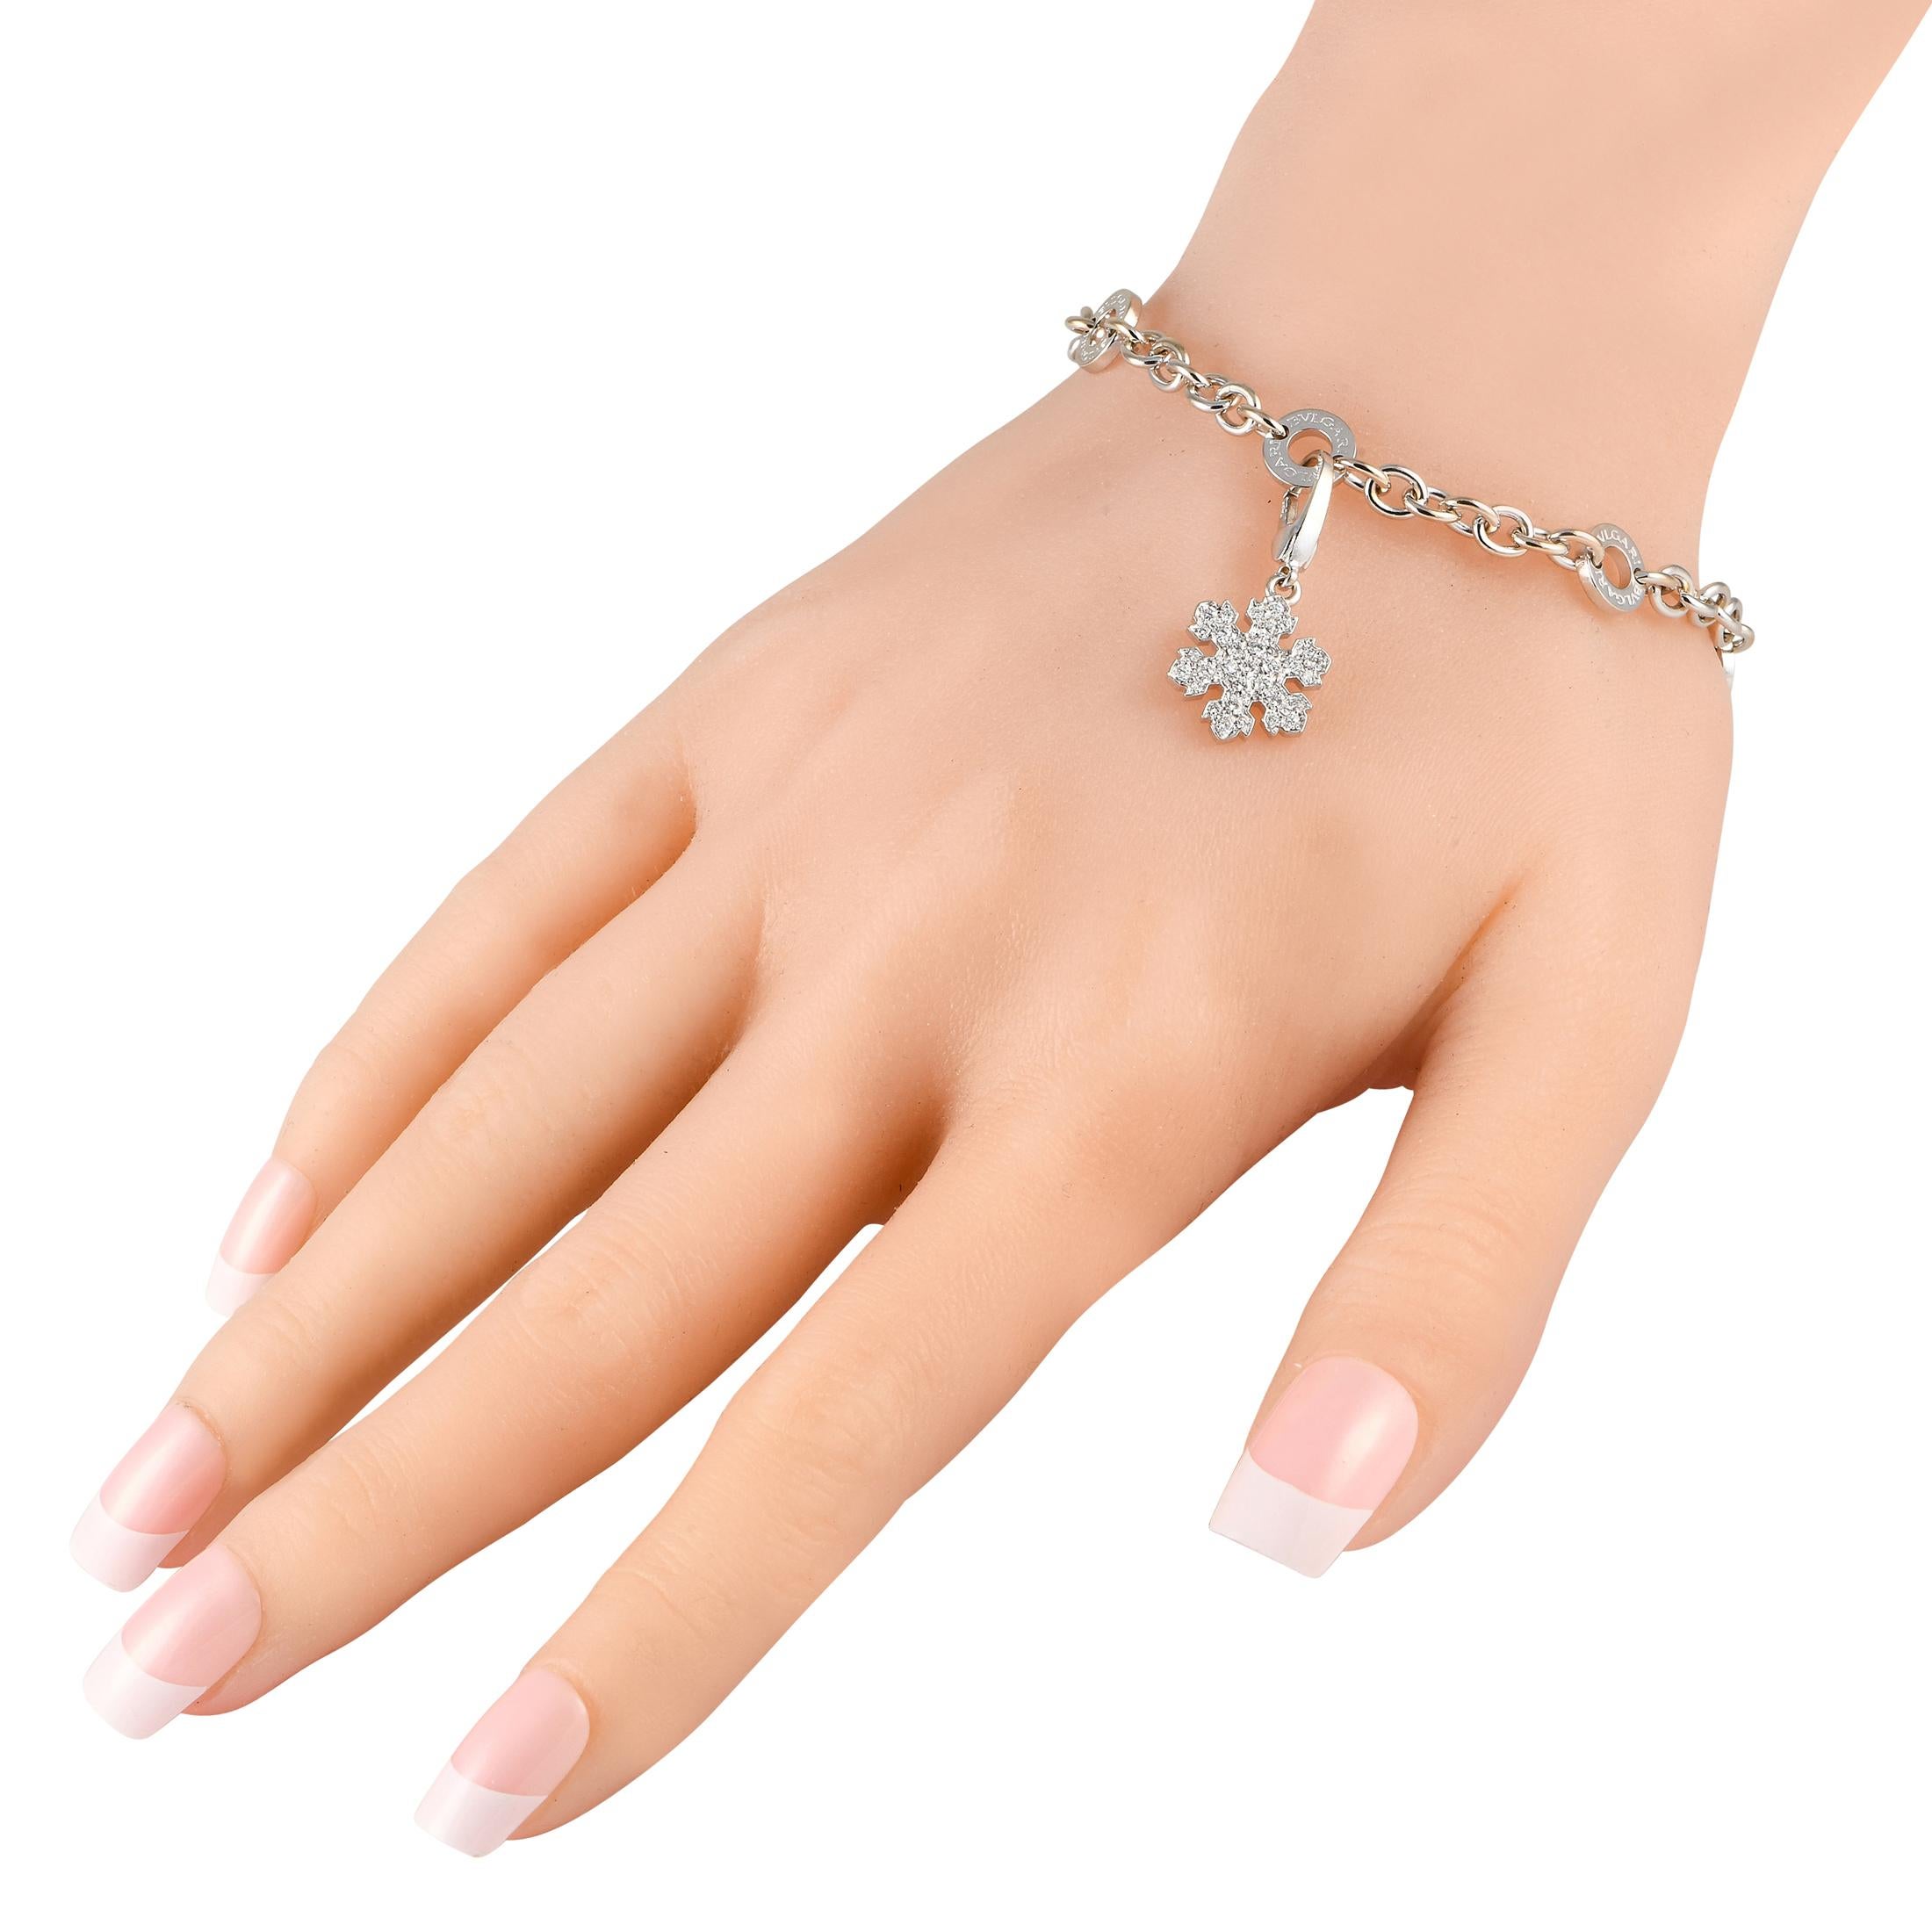 An exquisite snowflake charm covered in sparkling Diamonds serves as a stunning focal point on this Bvlgari bracelet. Simple and elegant, its crafted from 18K White Gold and measures 8.0 long.This jewelry piece is offered in estate condition and